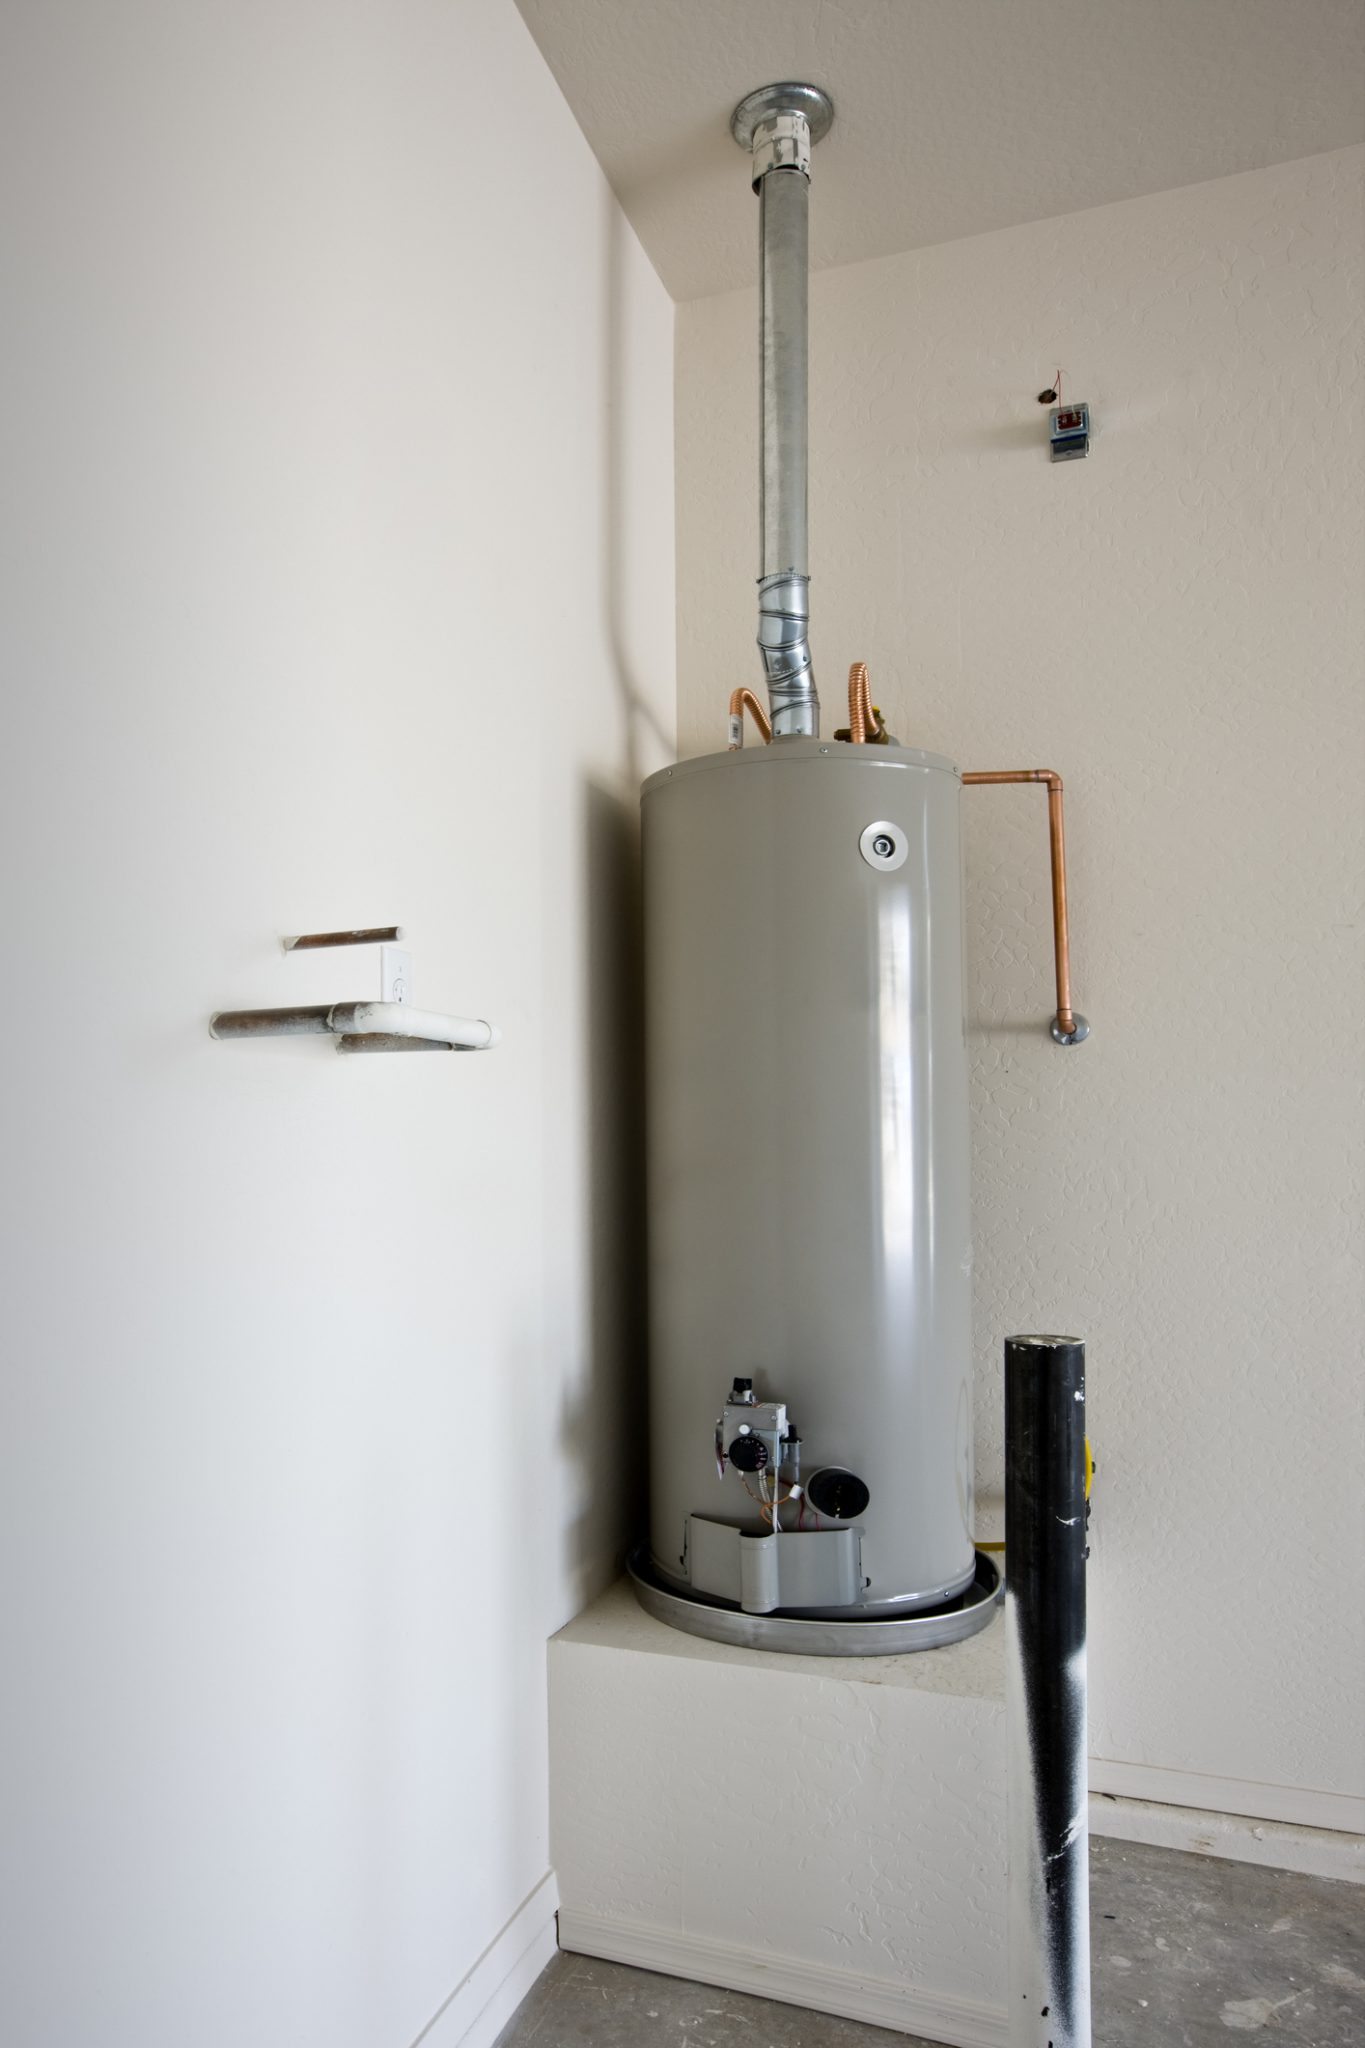 New Water Heater Cost 